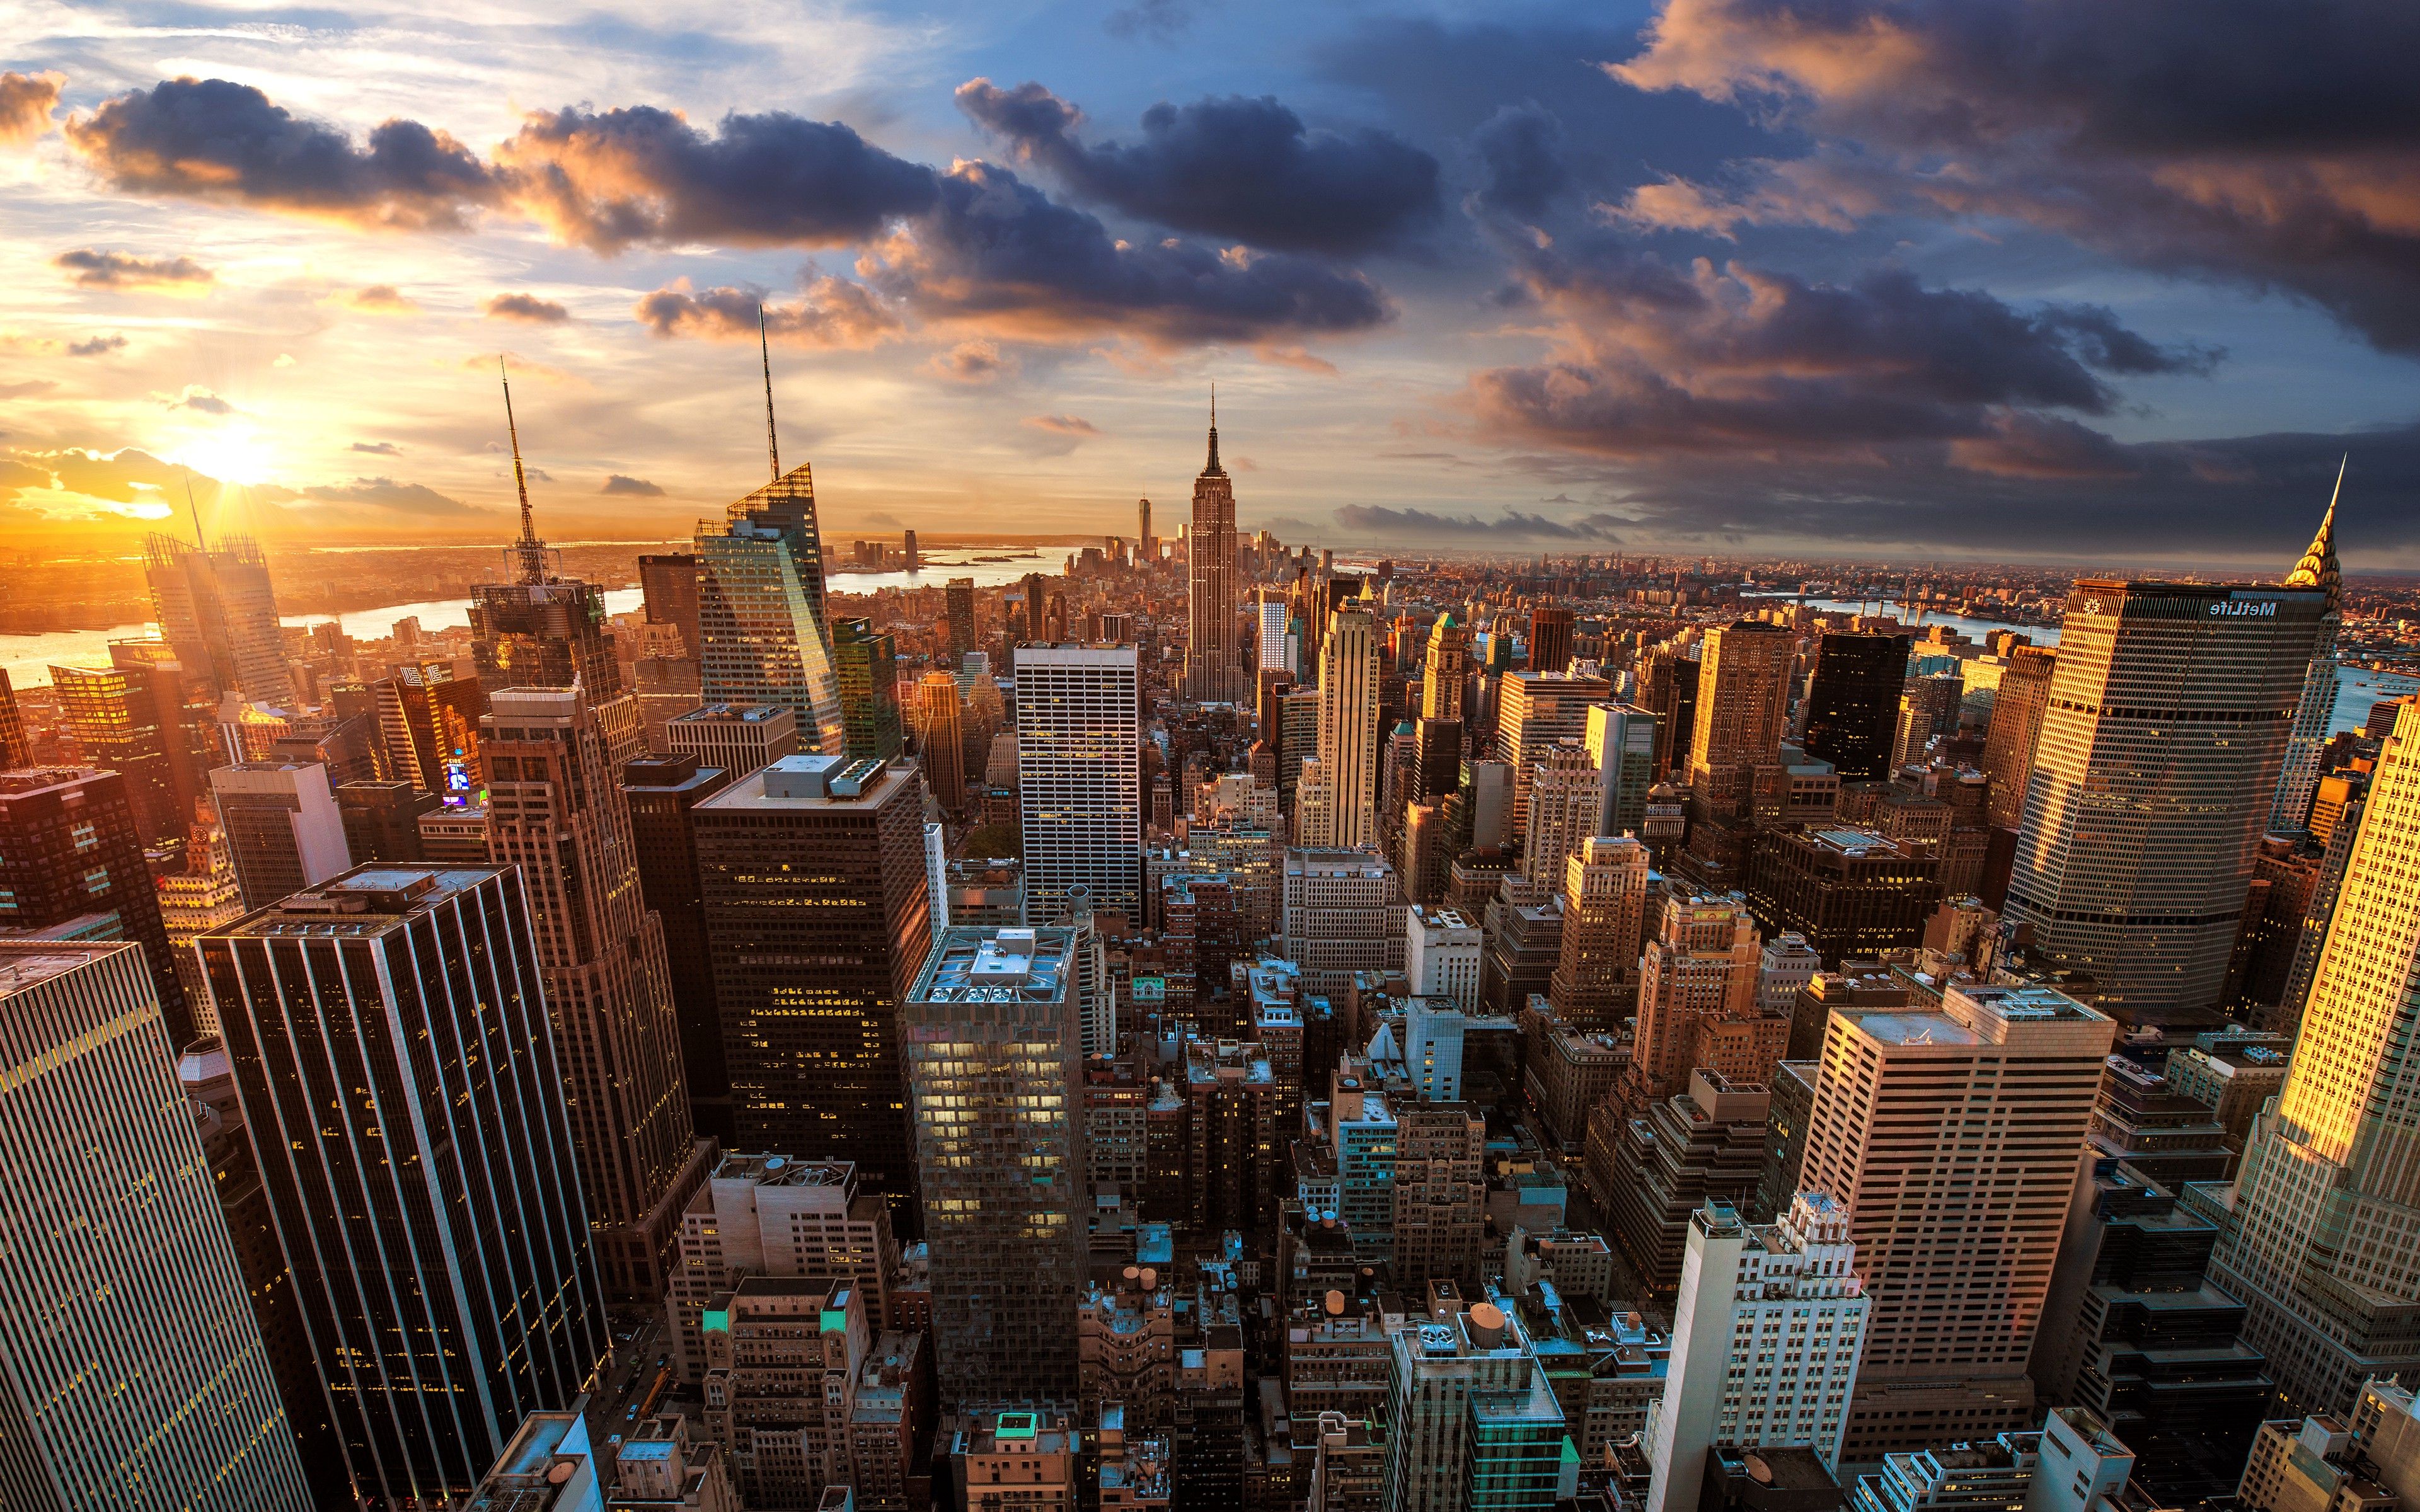 Intriguing Download Free New York City Wallpaper X Px York City To